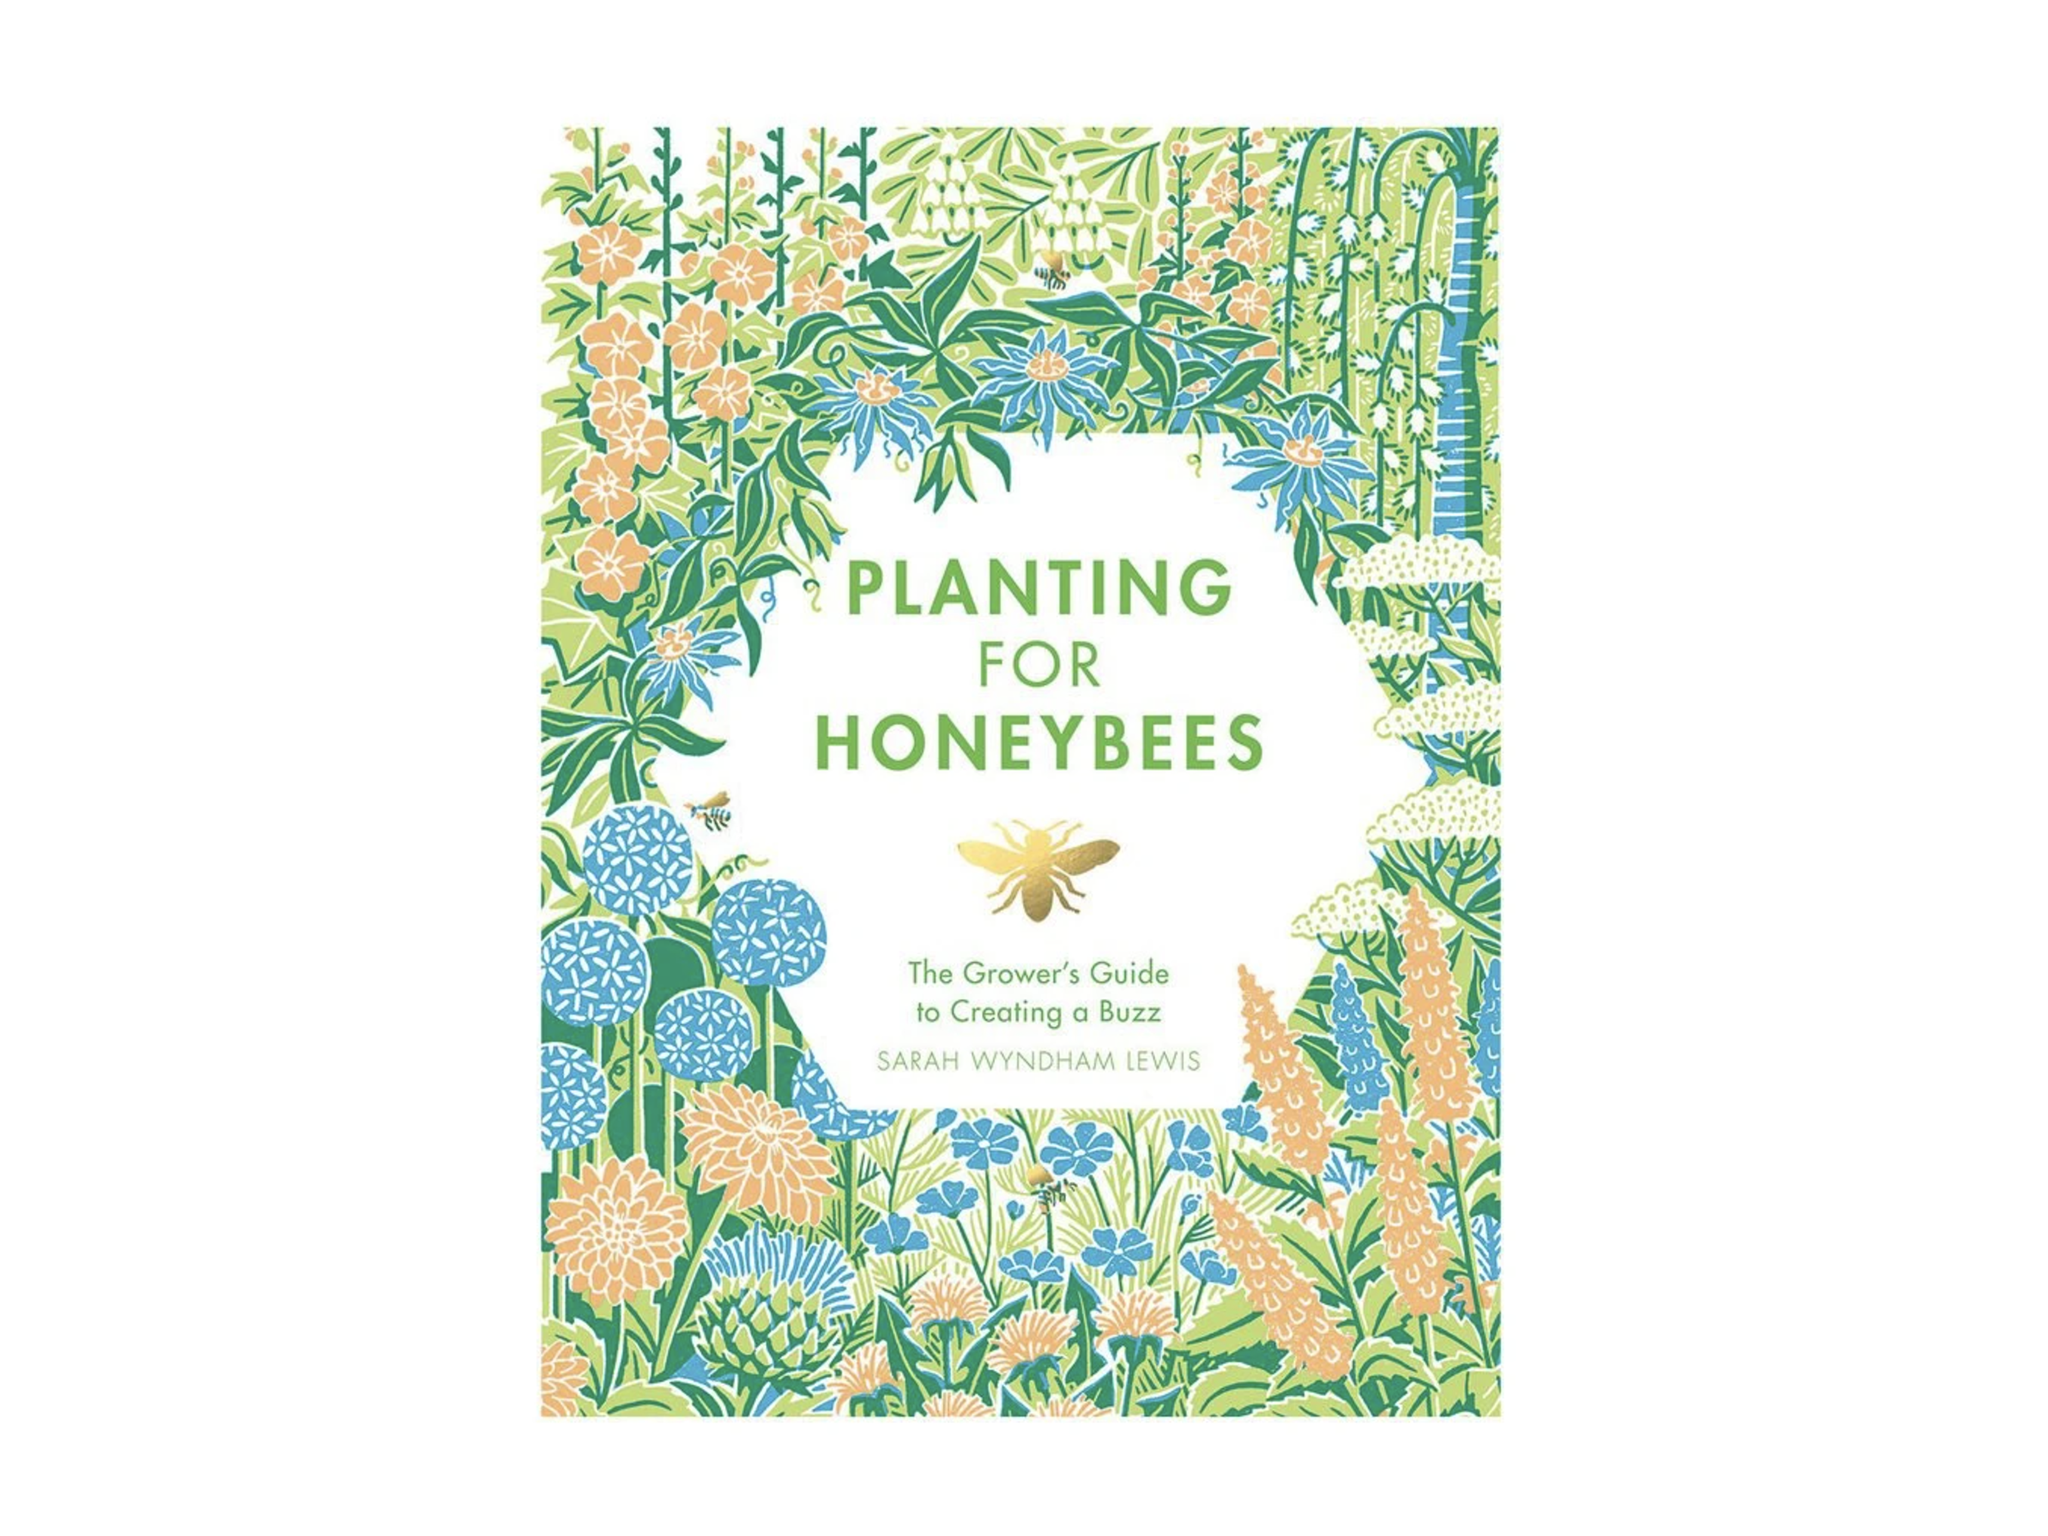 Planting for Honeybees: The Grower’s Guide to Creating a Buzz’  indybest